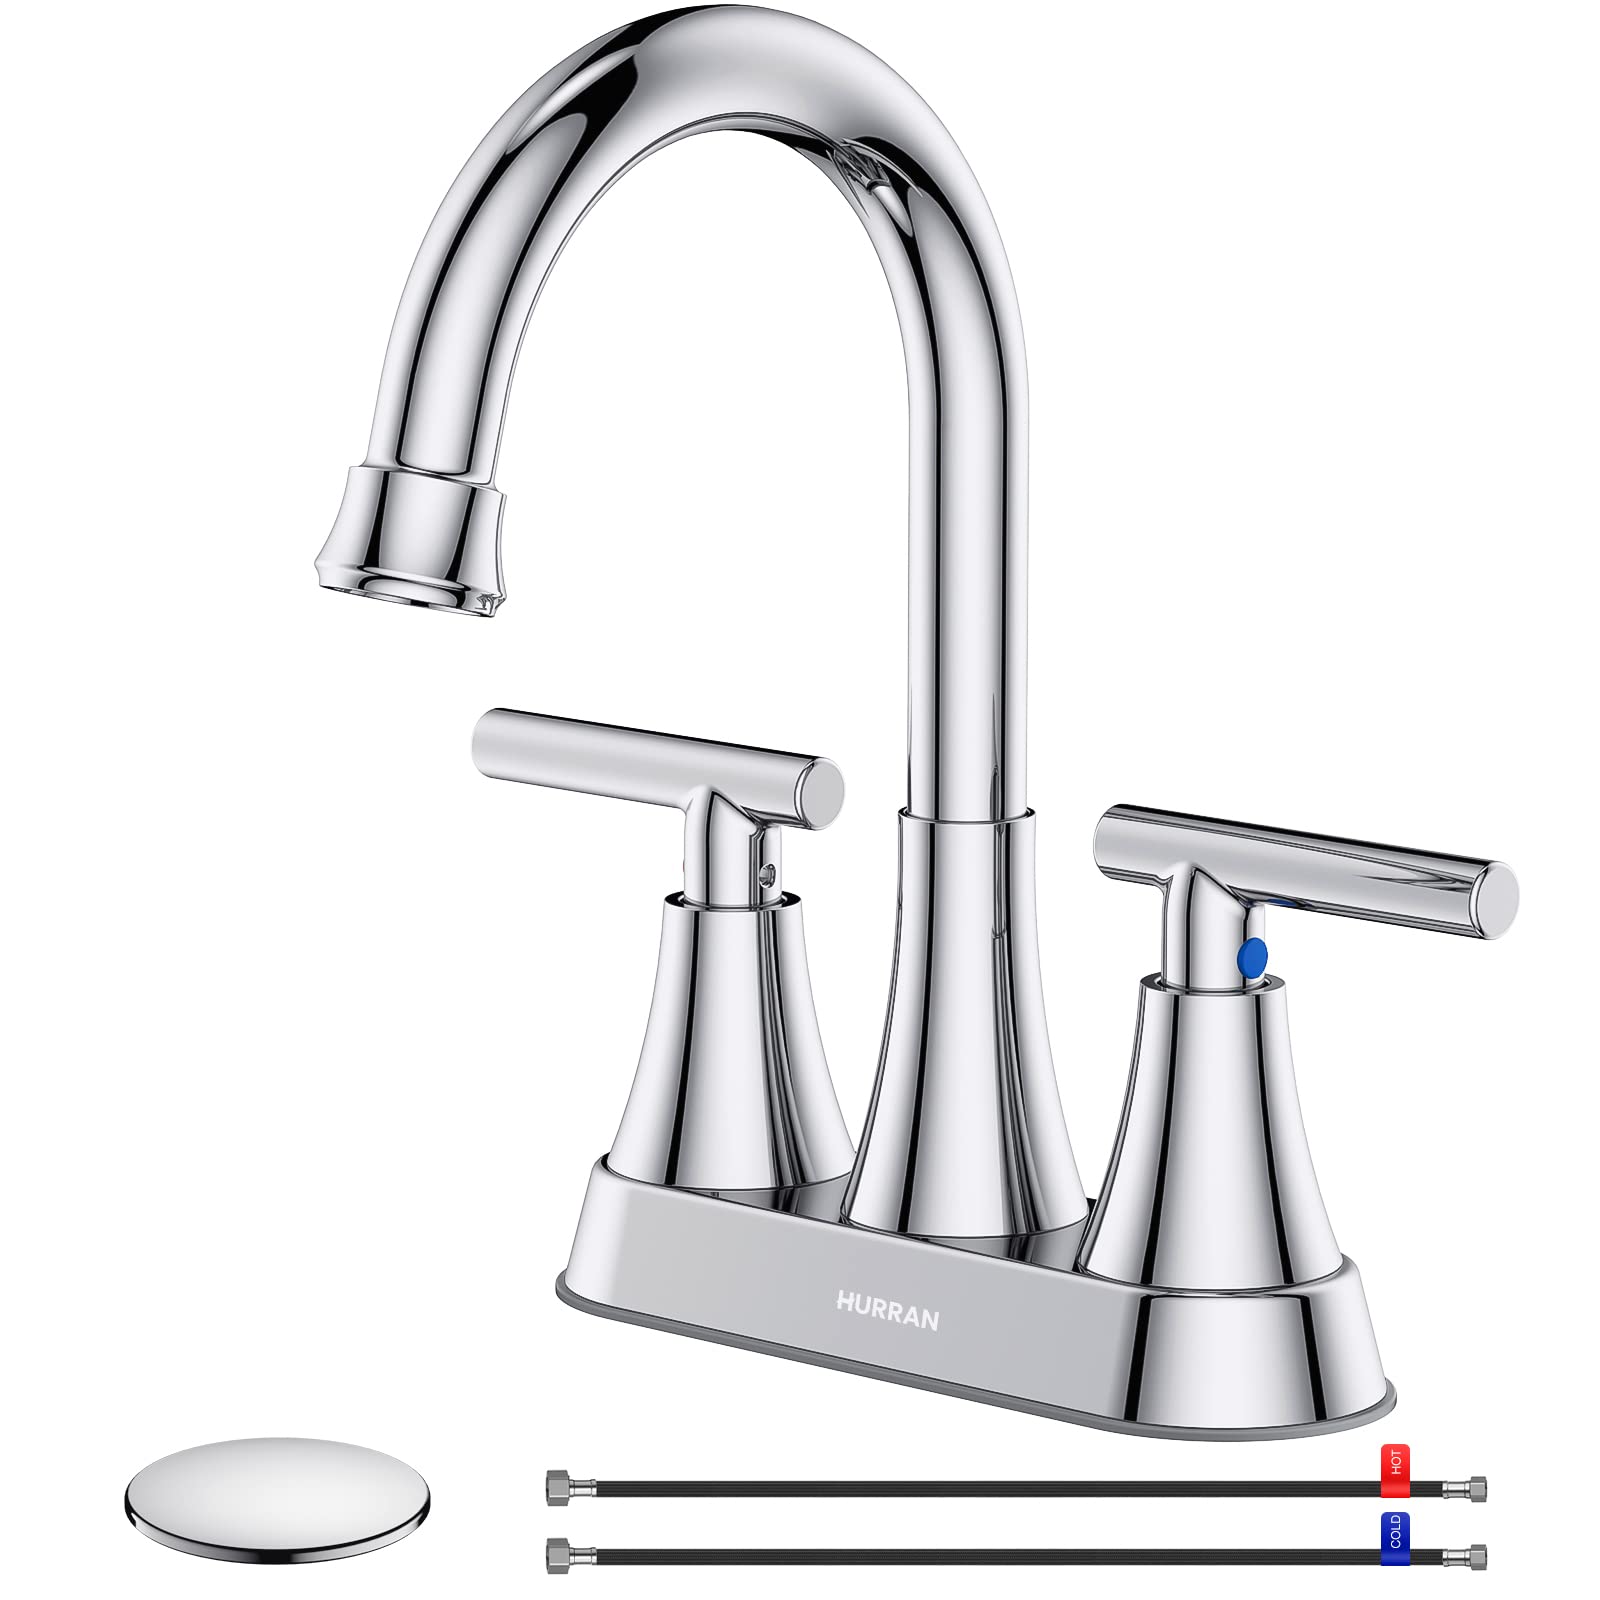 Hurran Bathroom Faucets for Sink 3 Hole